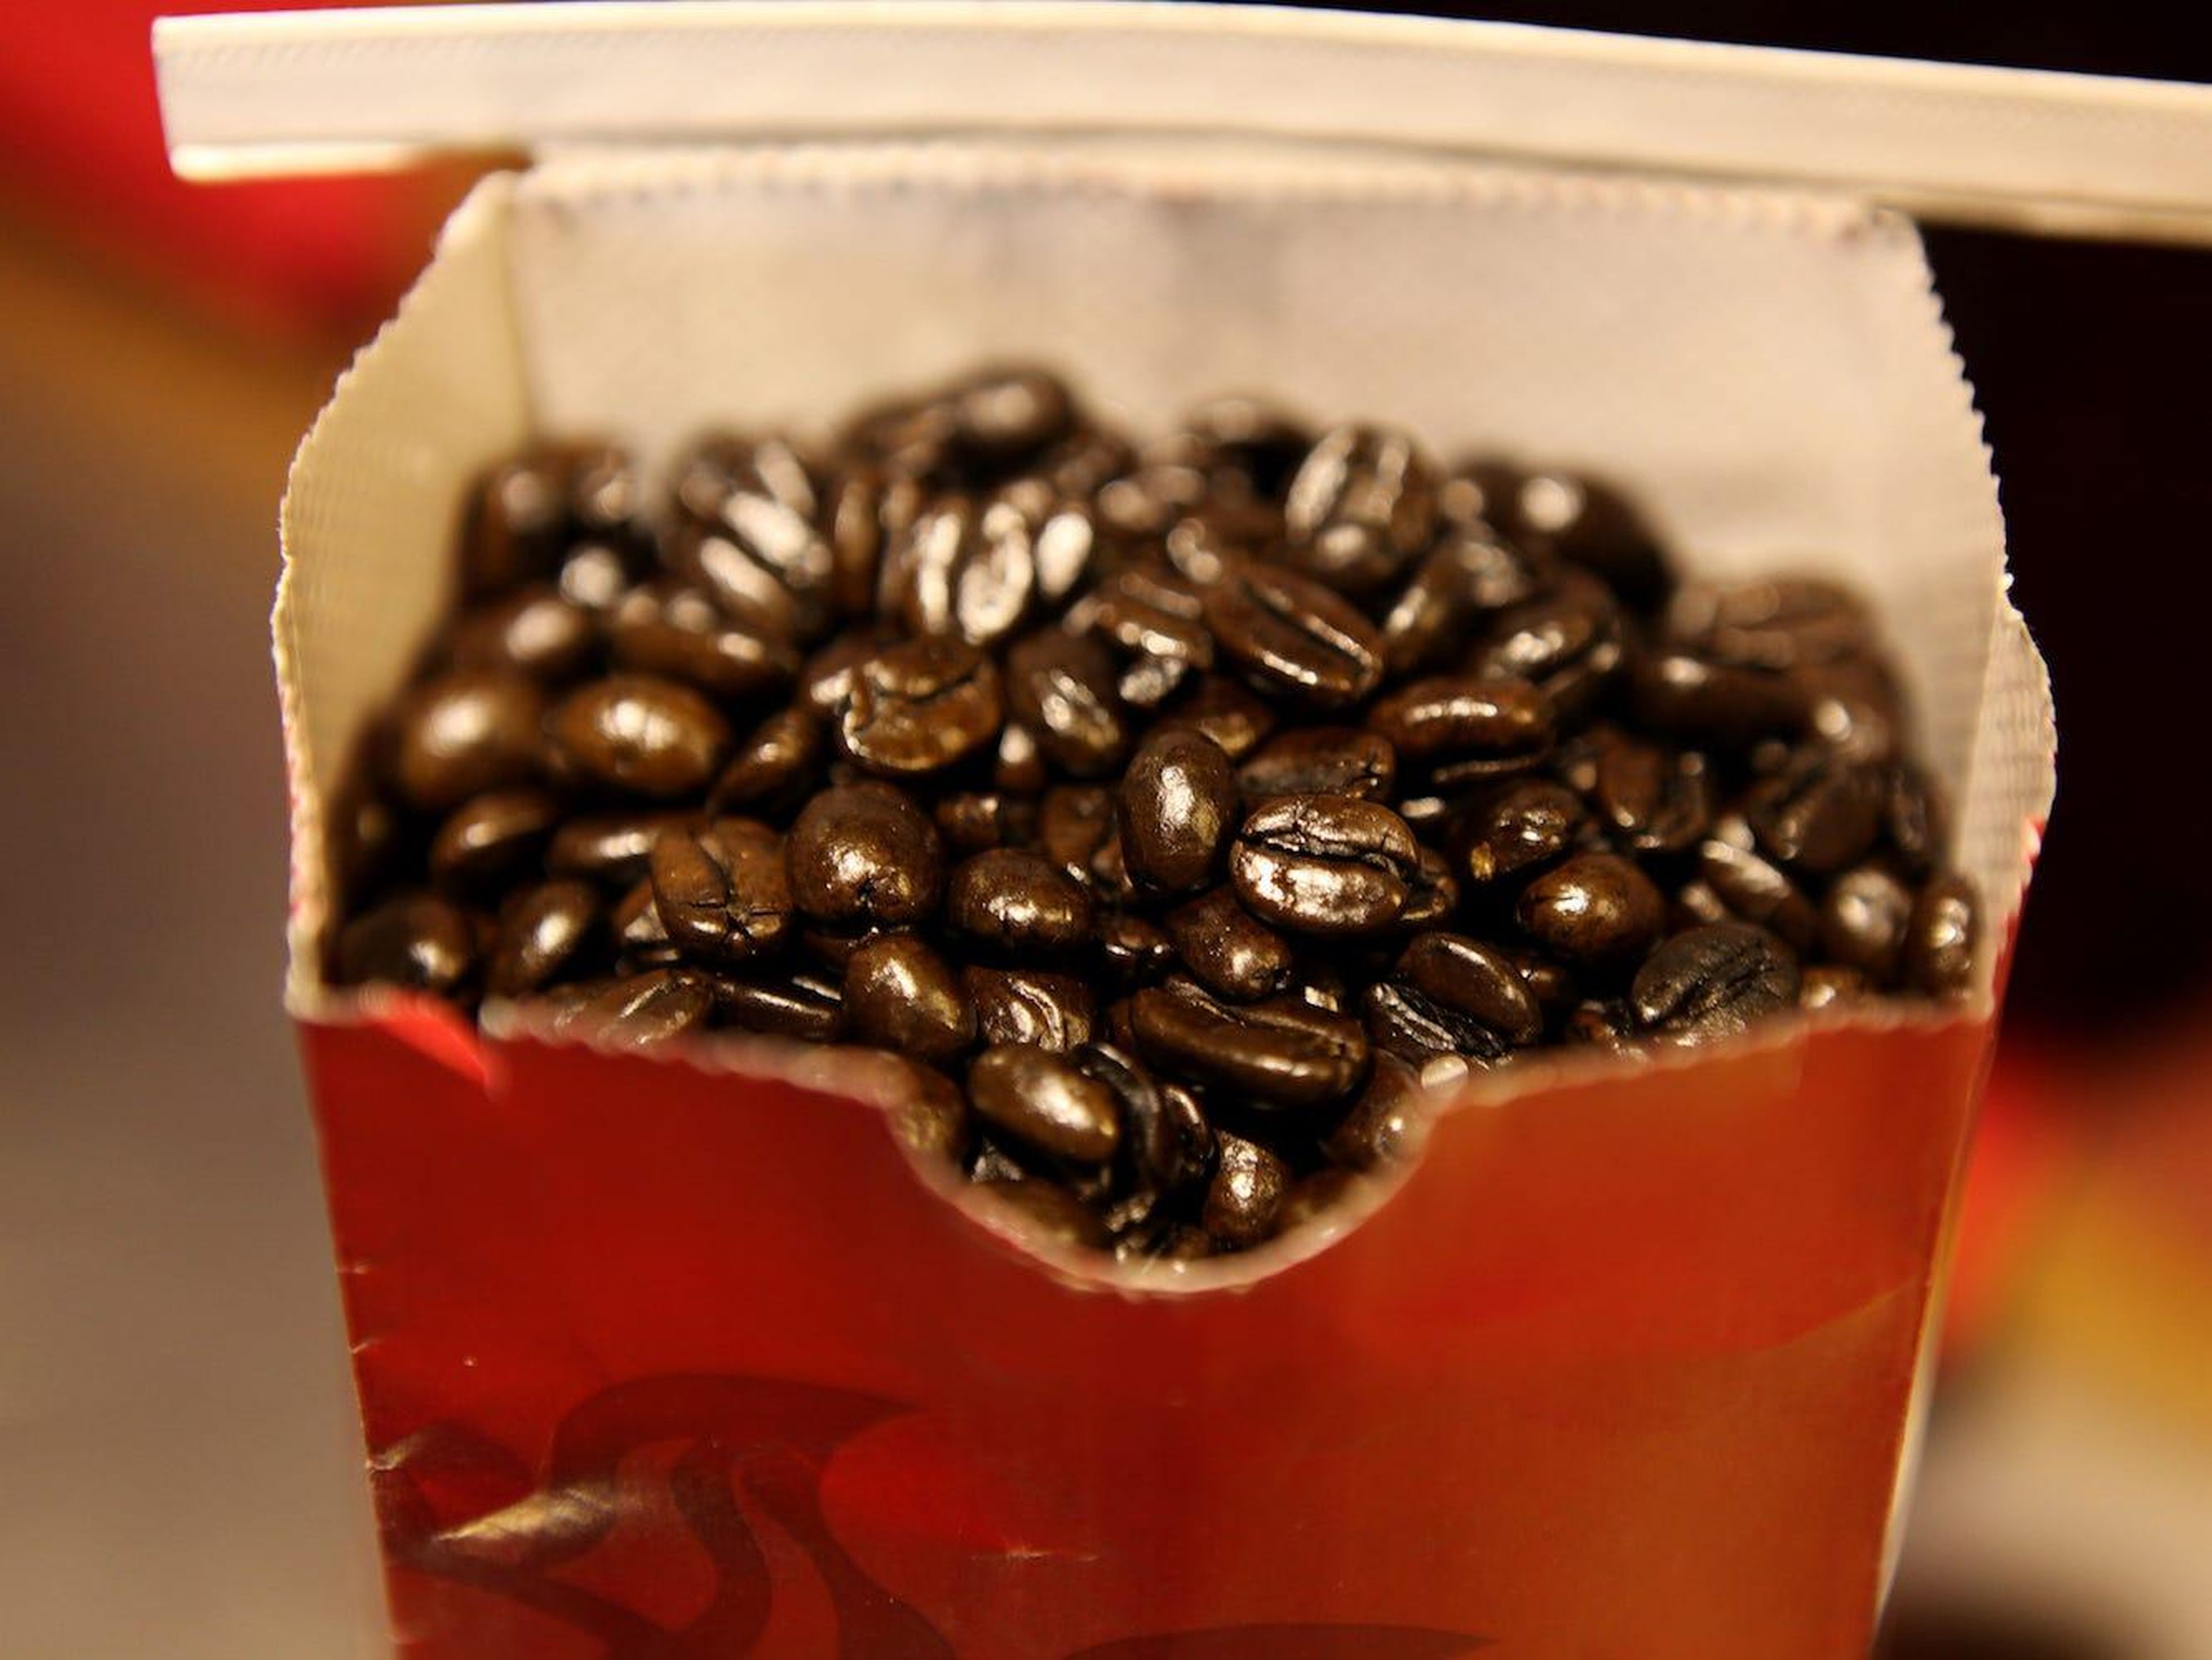 Coffee beans don't belong in the freezer.